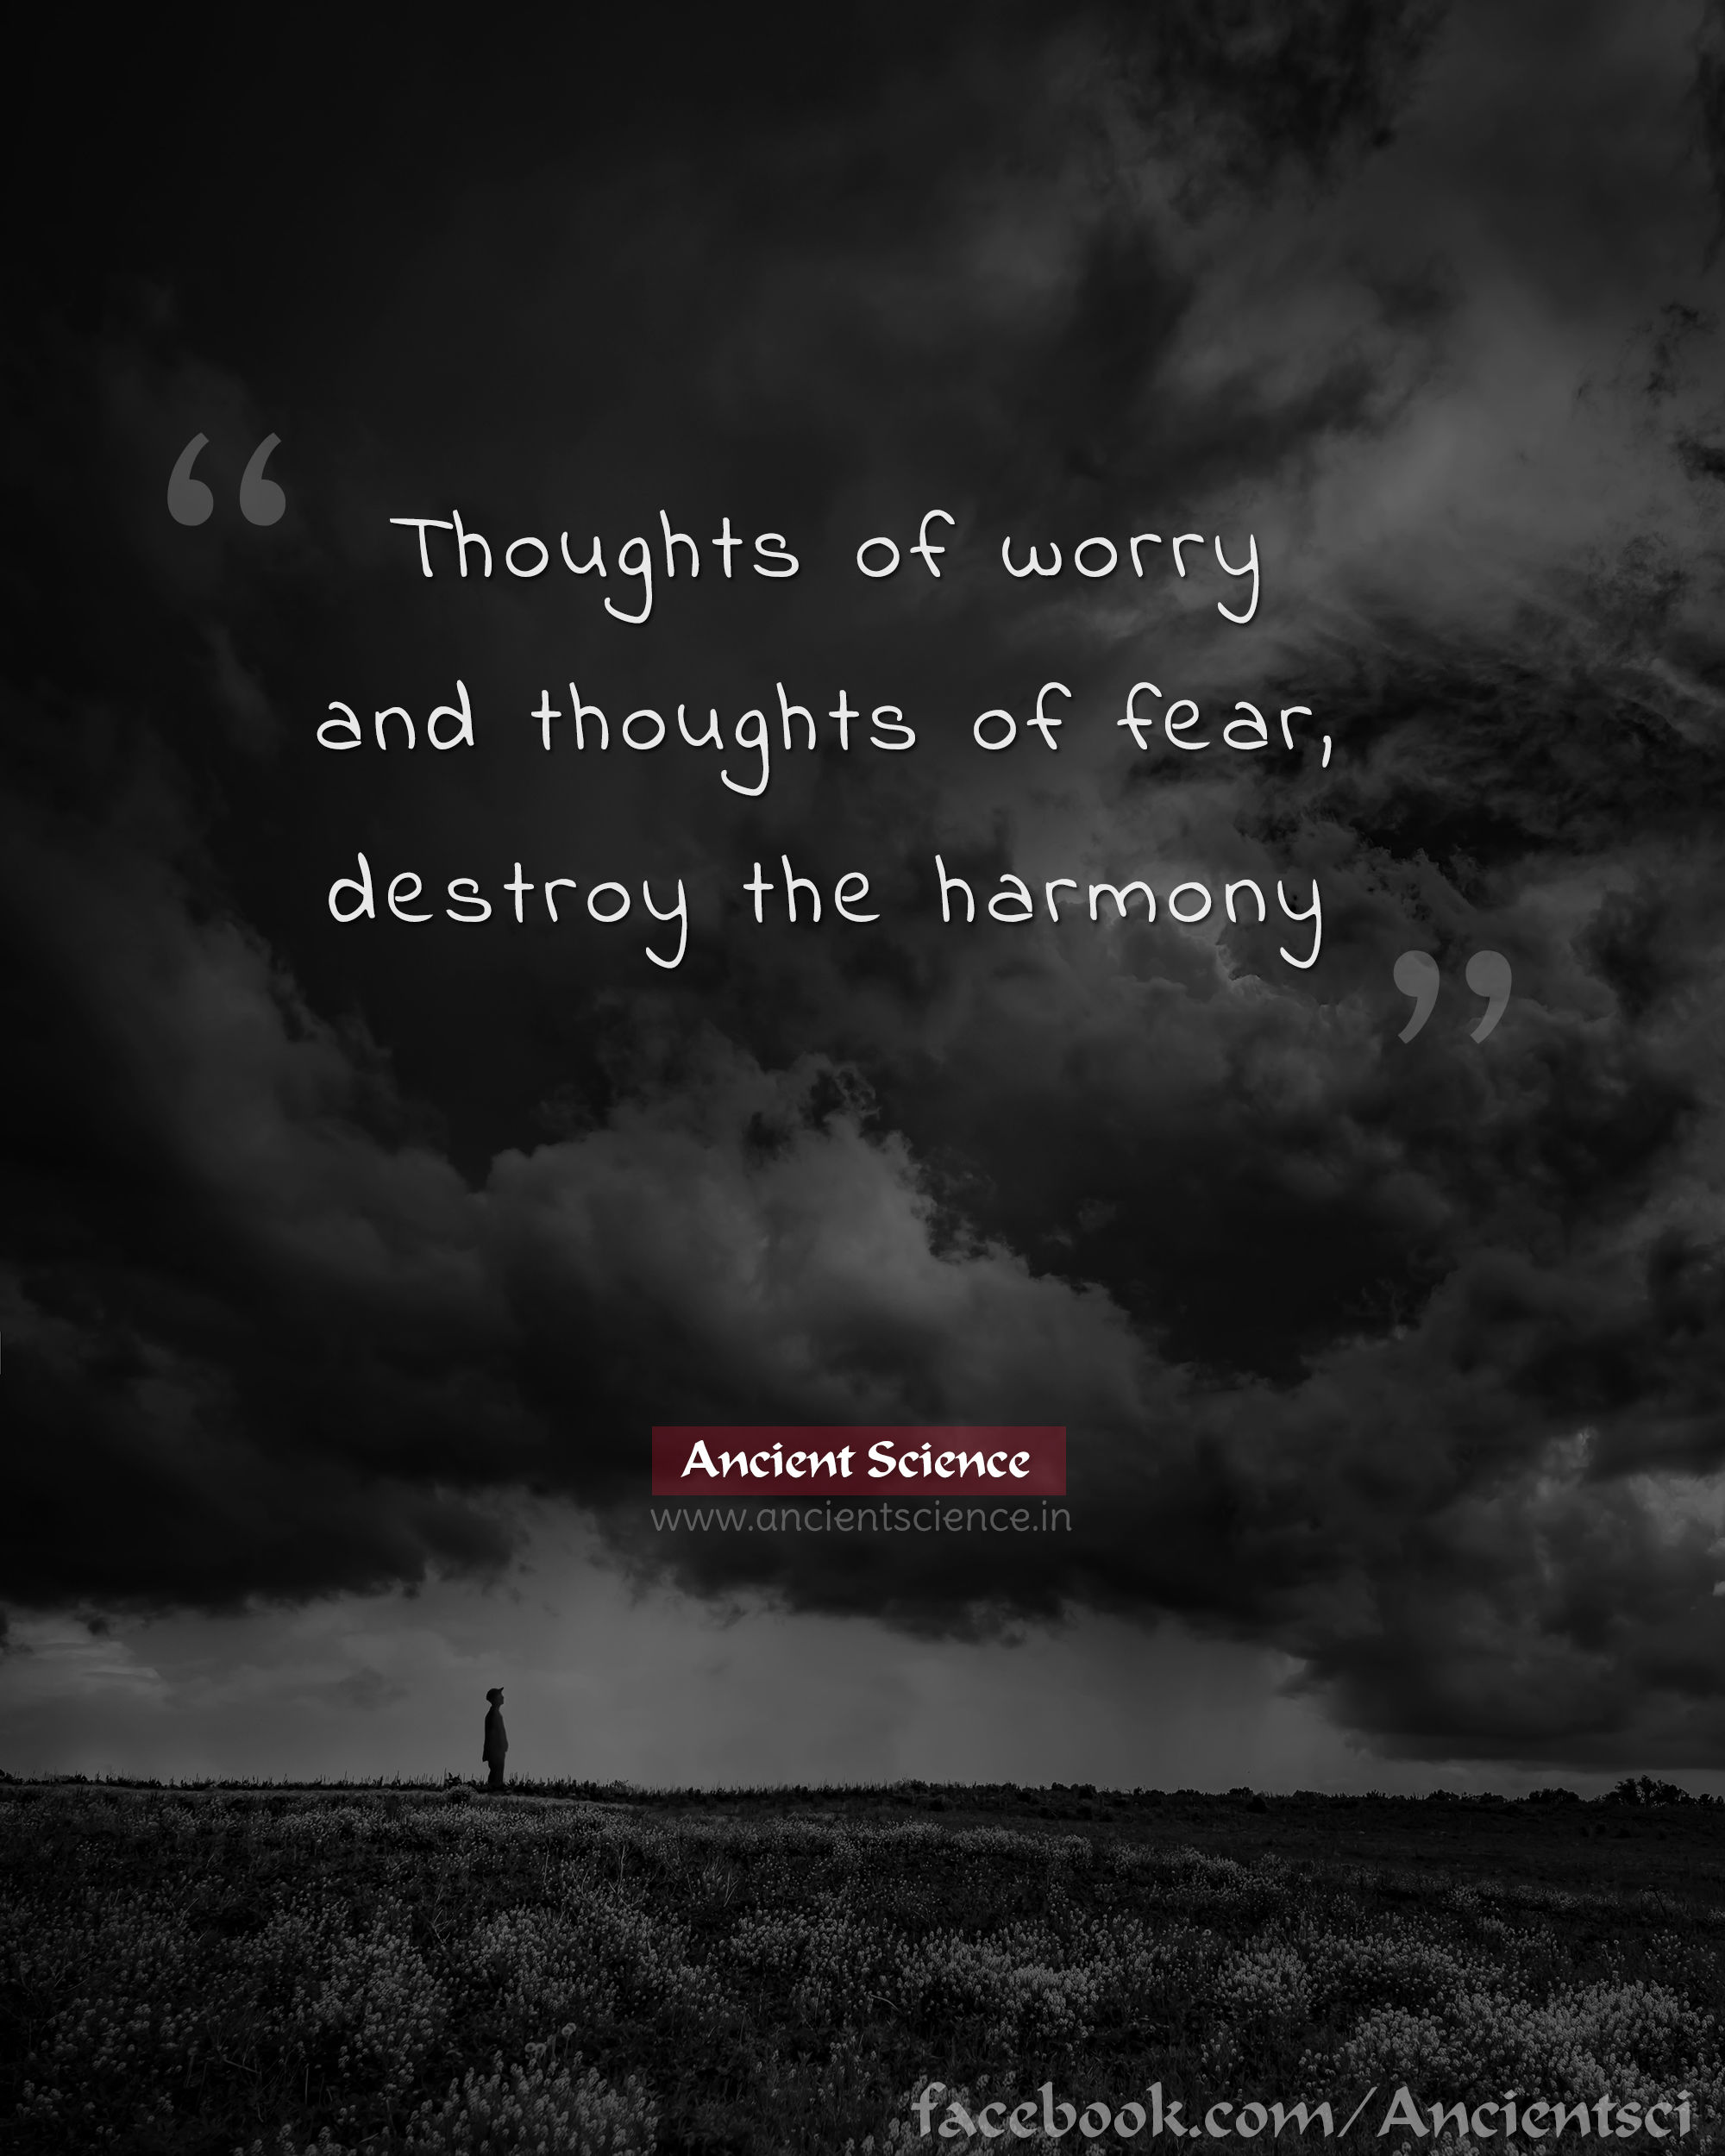 Thoughts of worry and thoughts of fear, destroy the harmony.